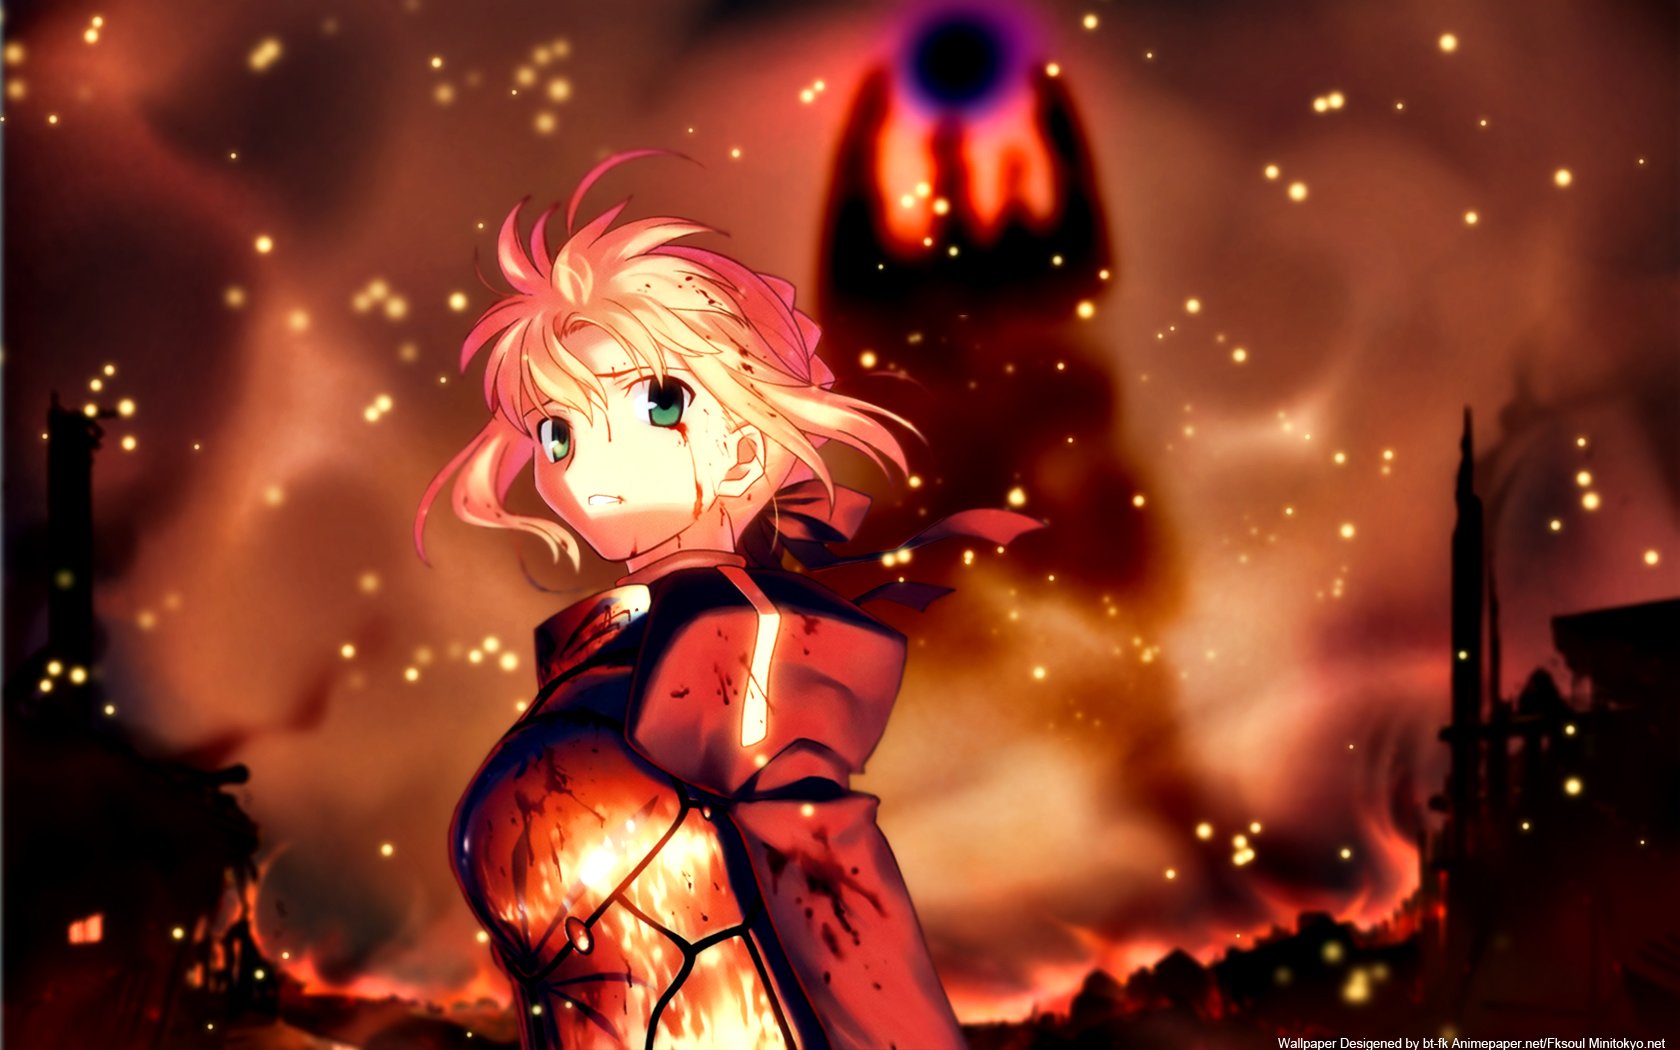 Saber   Fate Stay Night Wallpaper 24684456 1680x1050